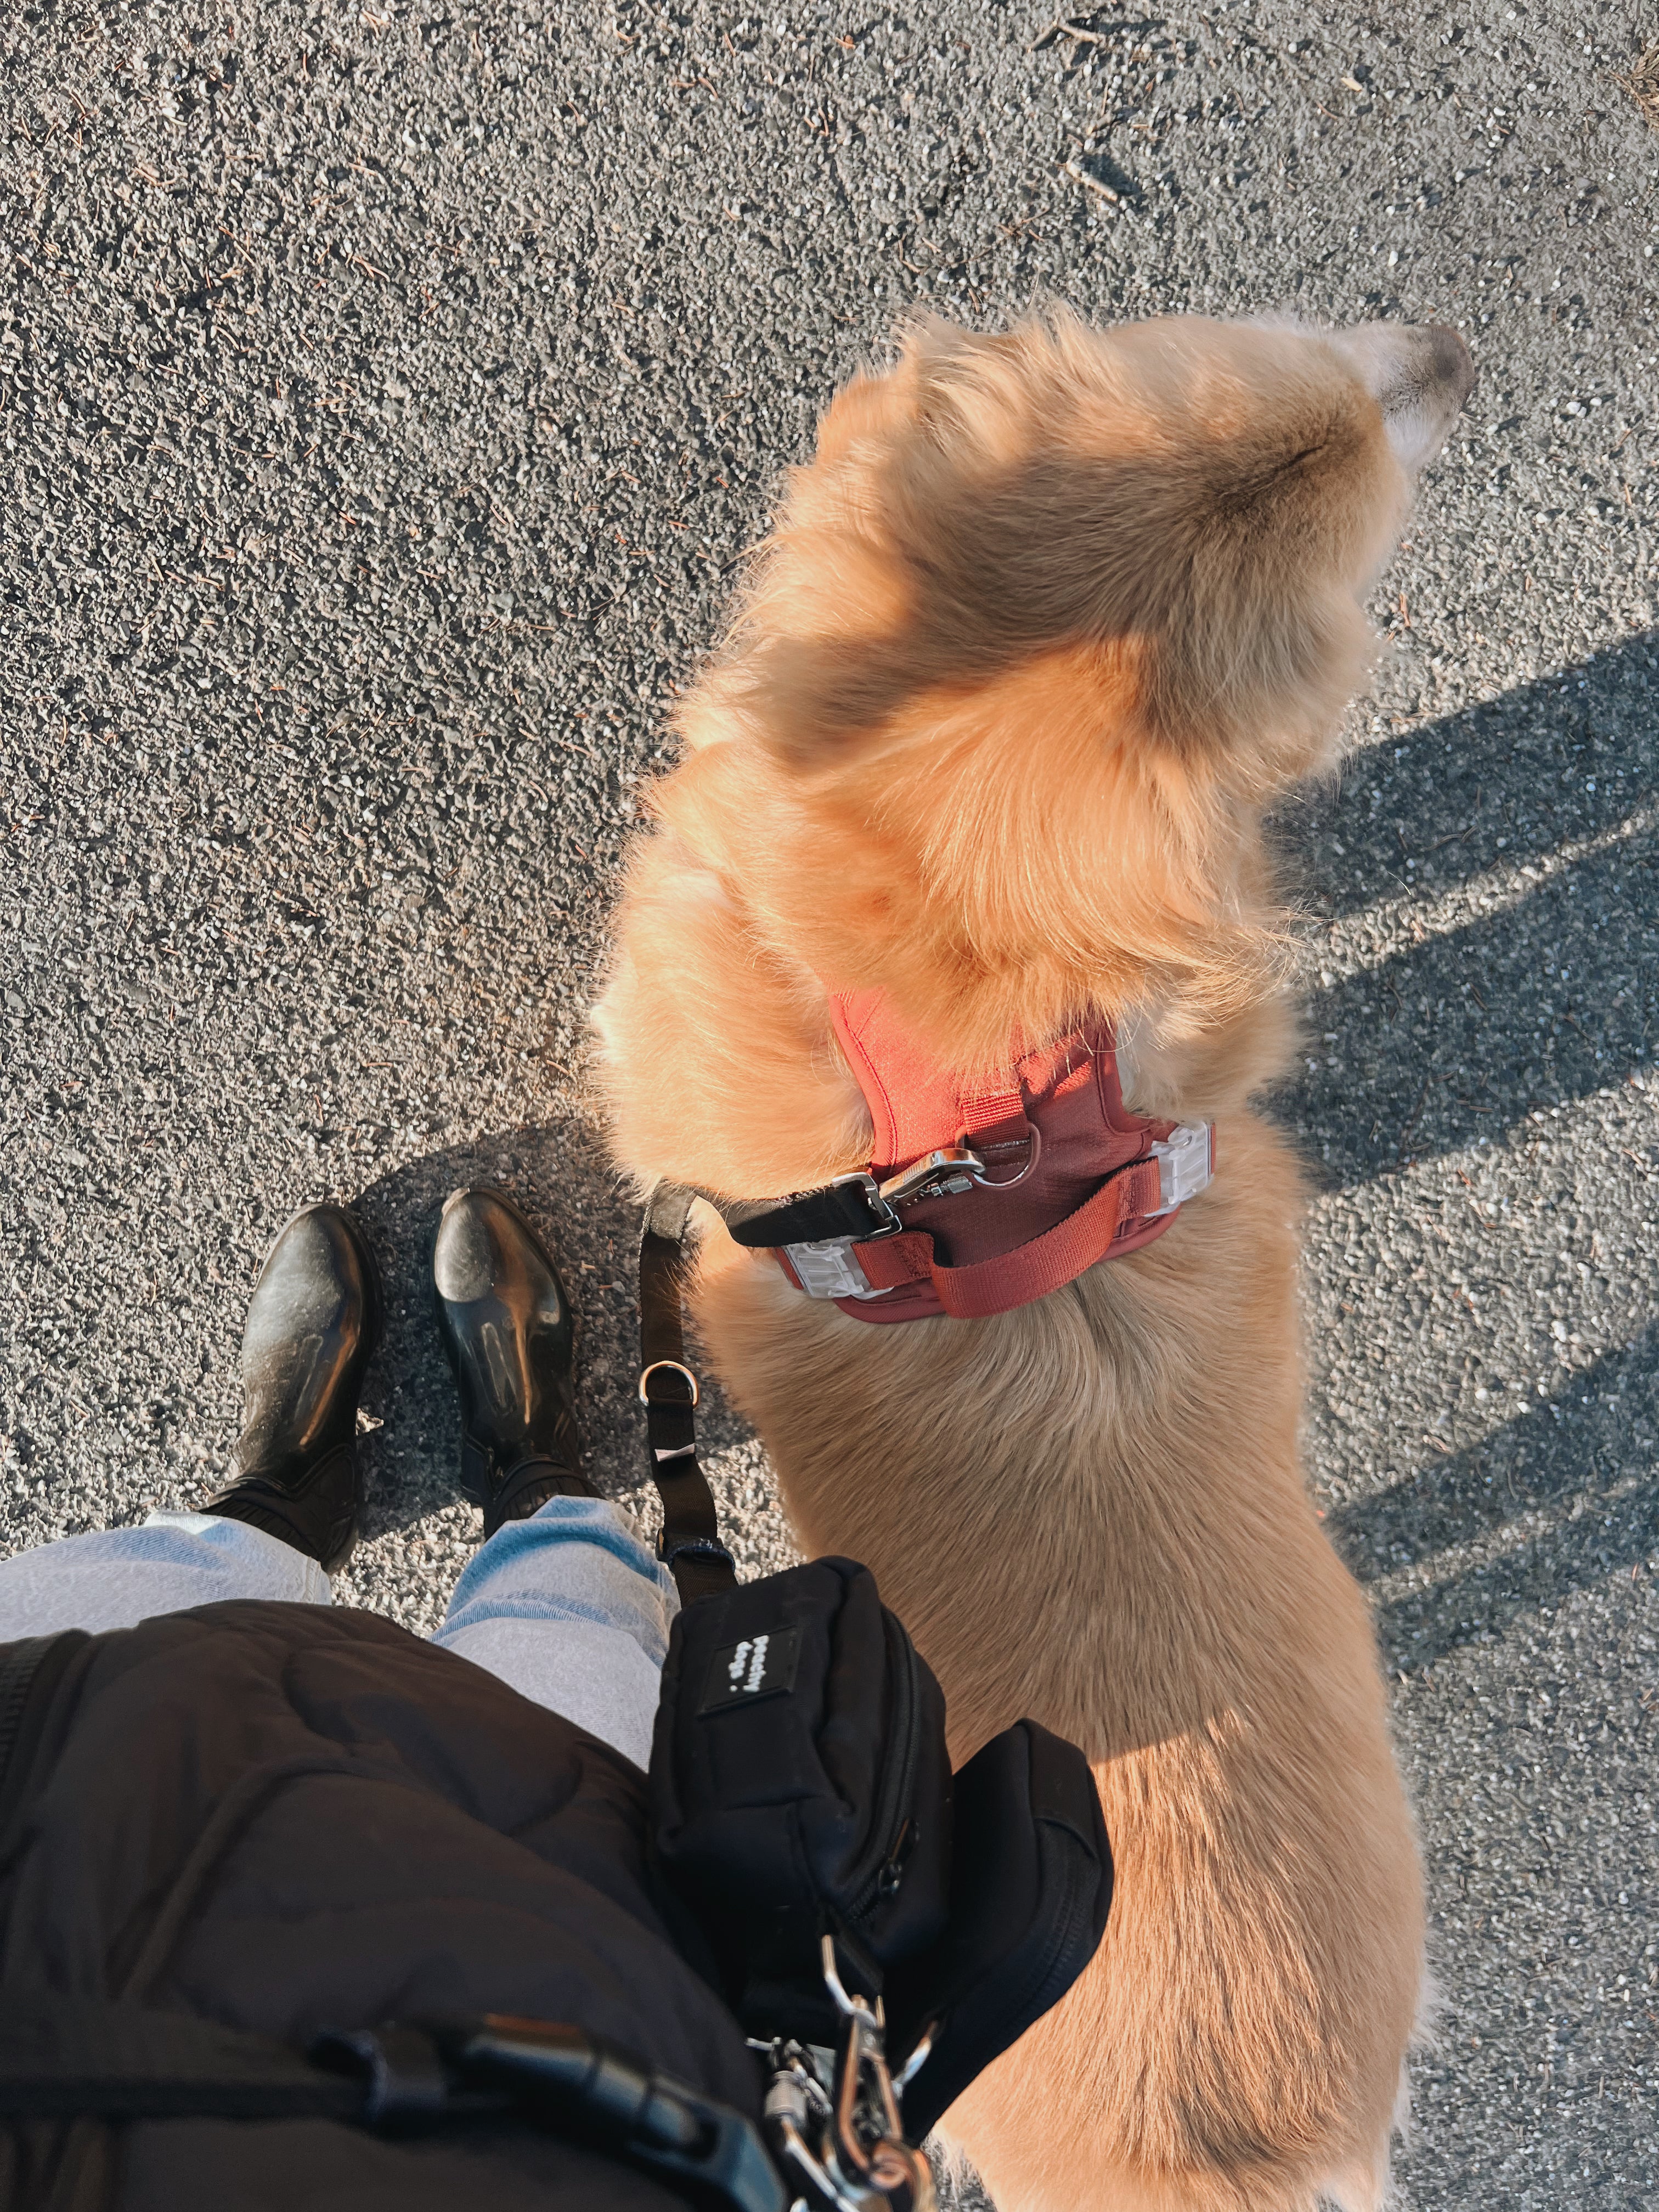 Leash Etiquette 101: A Guide to Dog Walking and Exploring